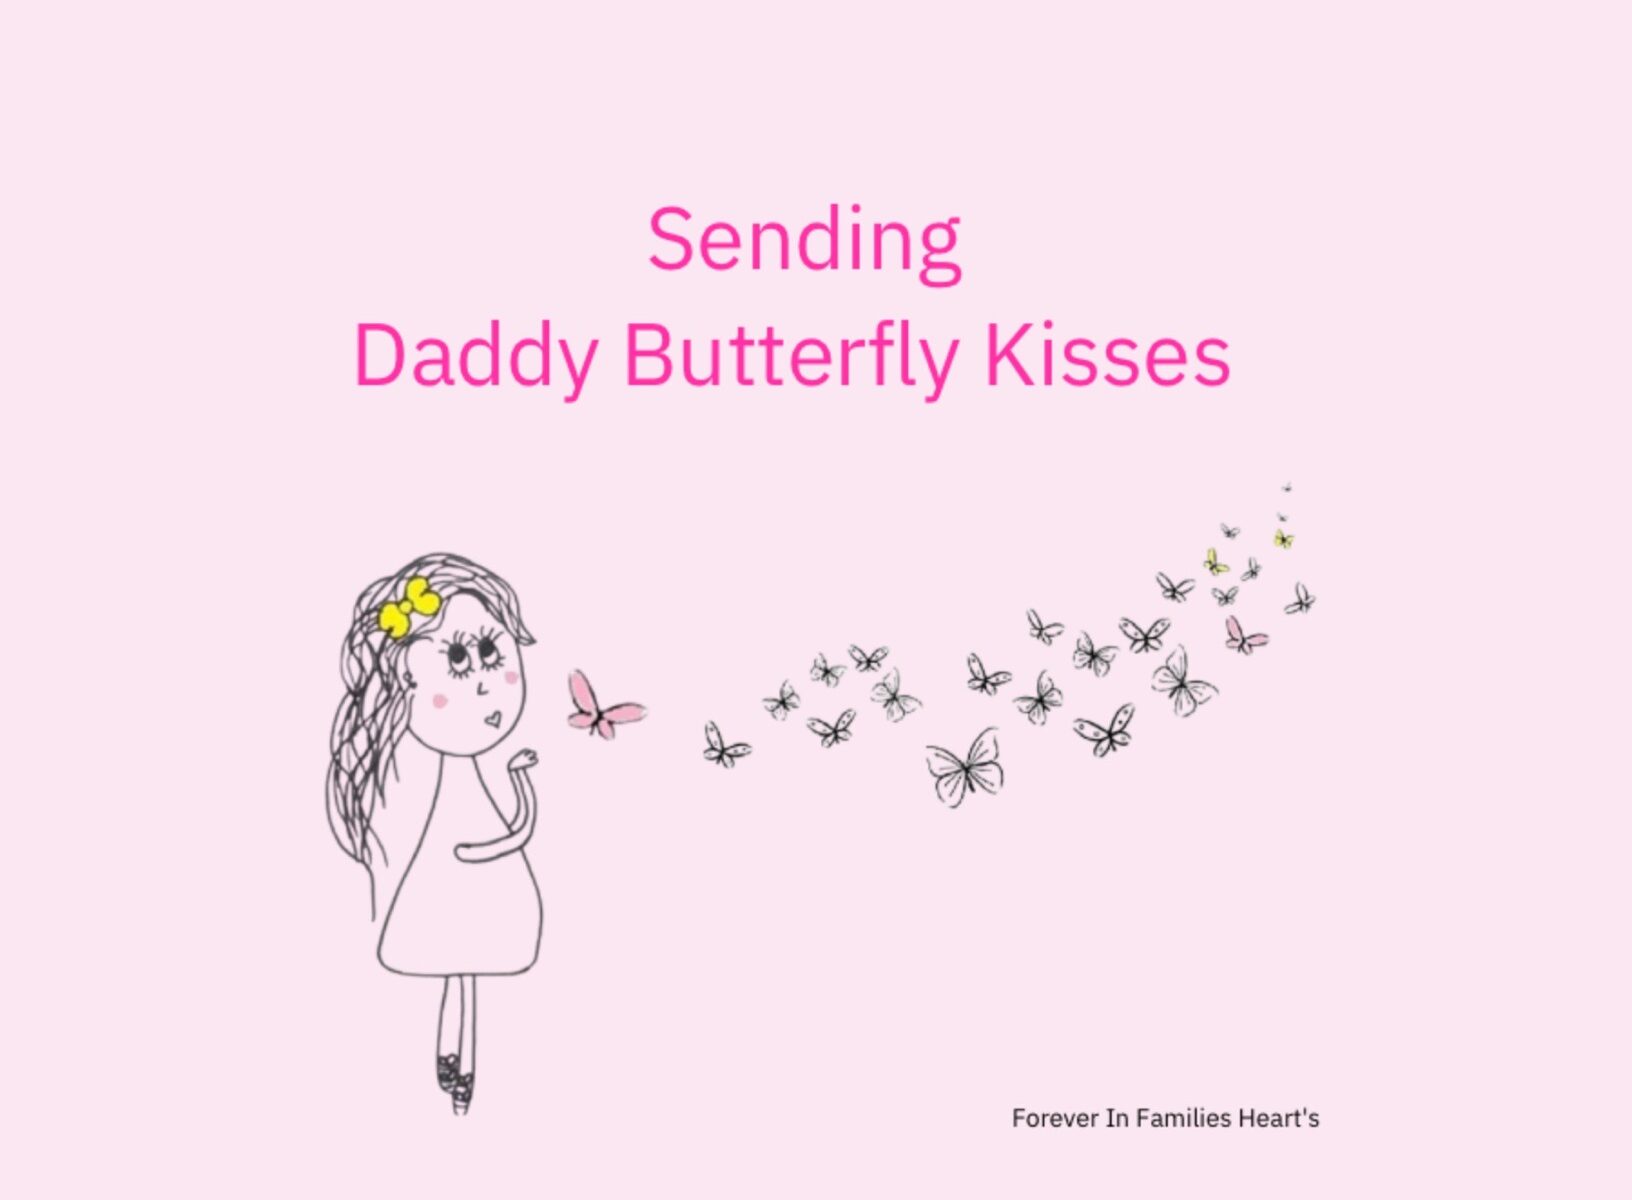 Butterfly kisses - dad